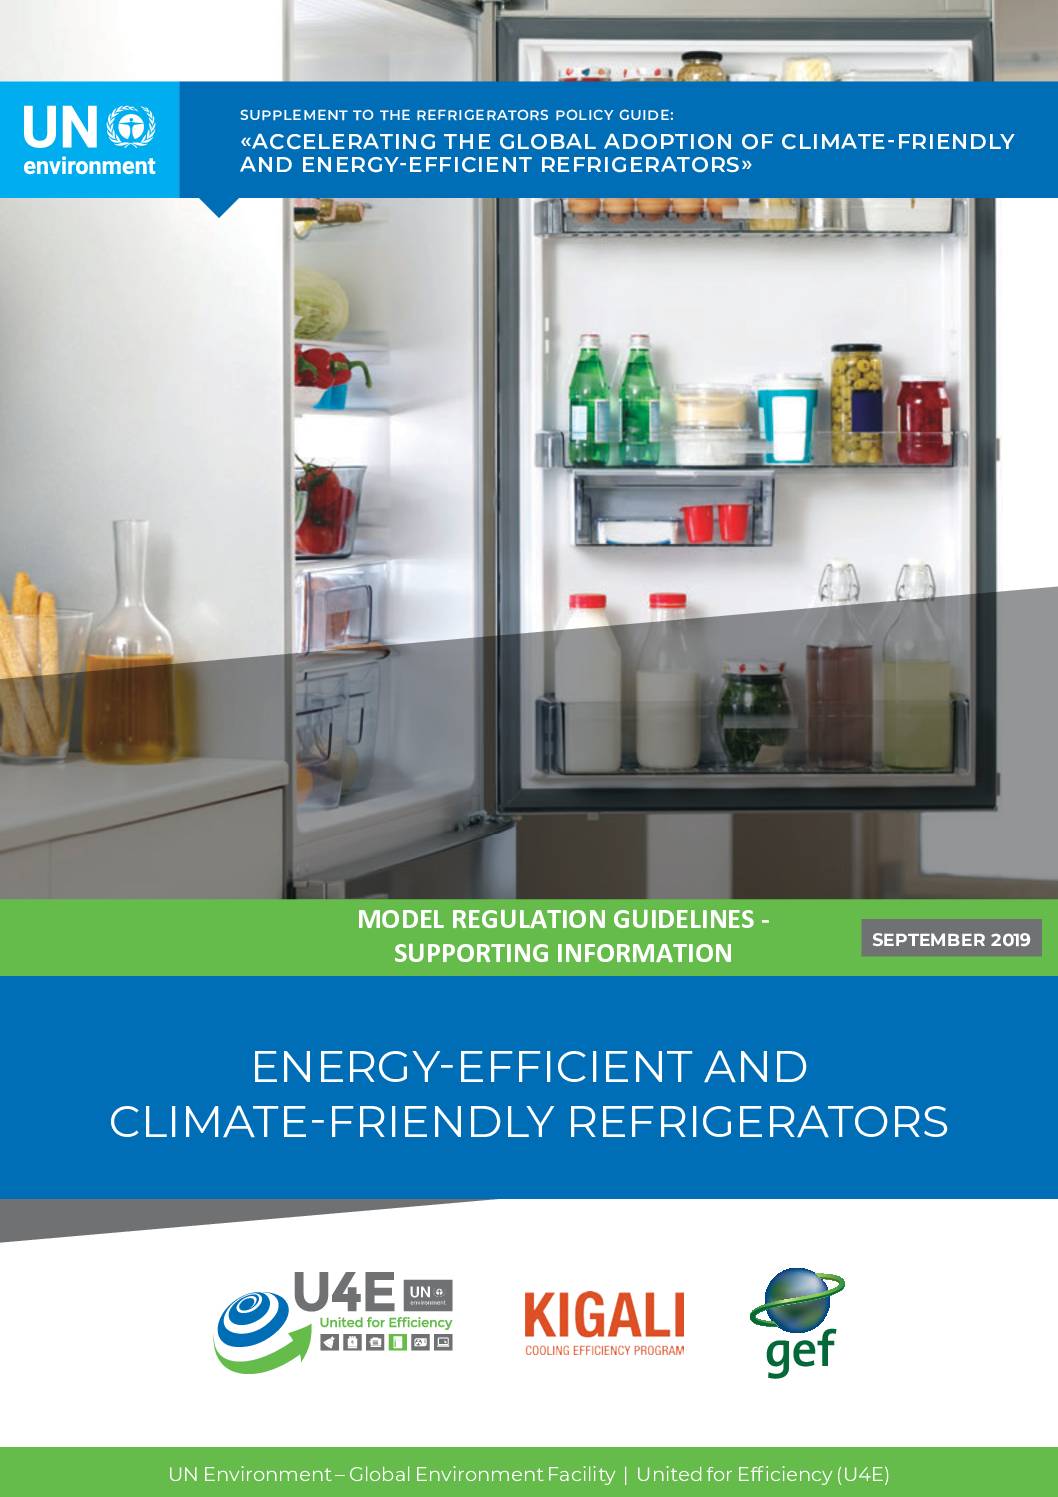 Model Regulation Guidelines Supporting Information For Energy-efficient And Climate-friendly Refrigerating Appliances